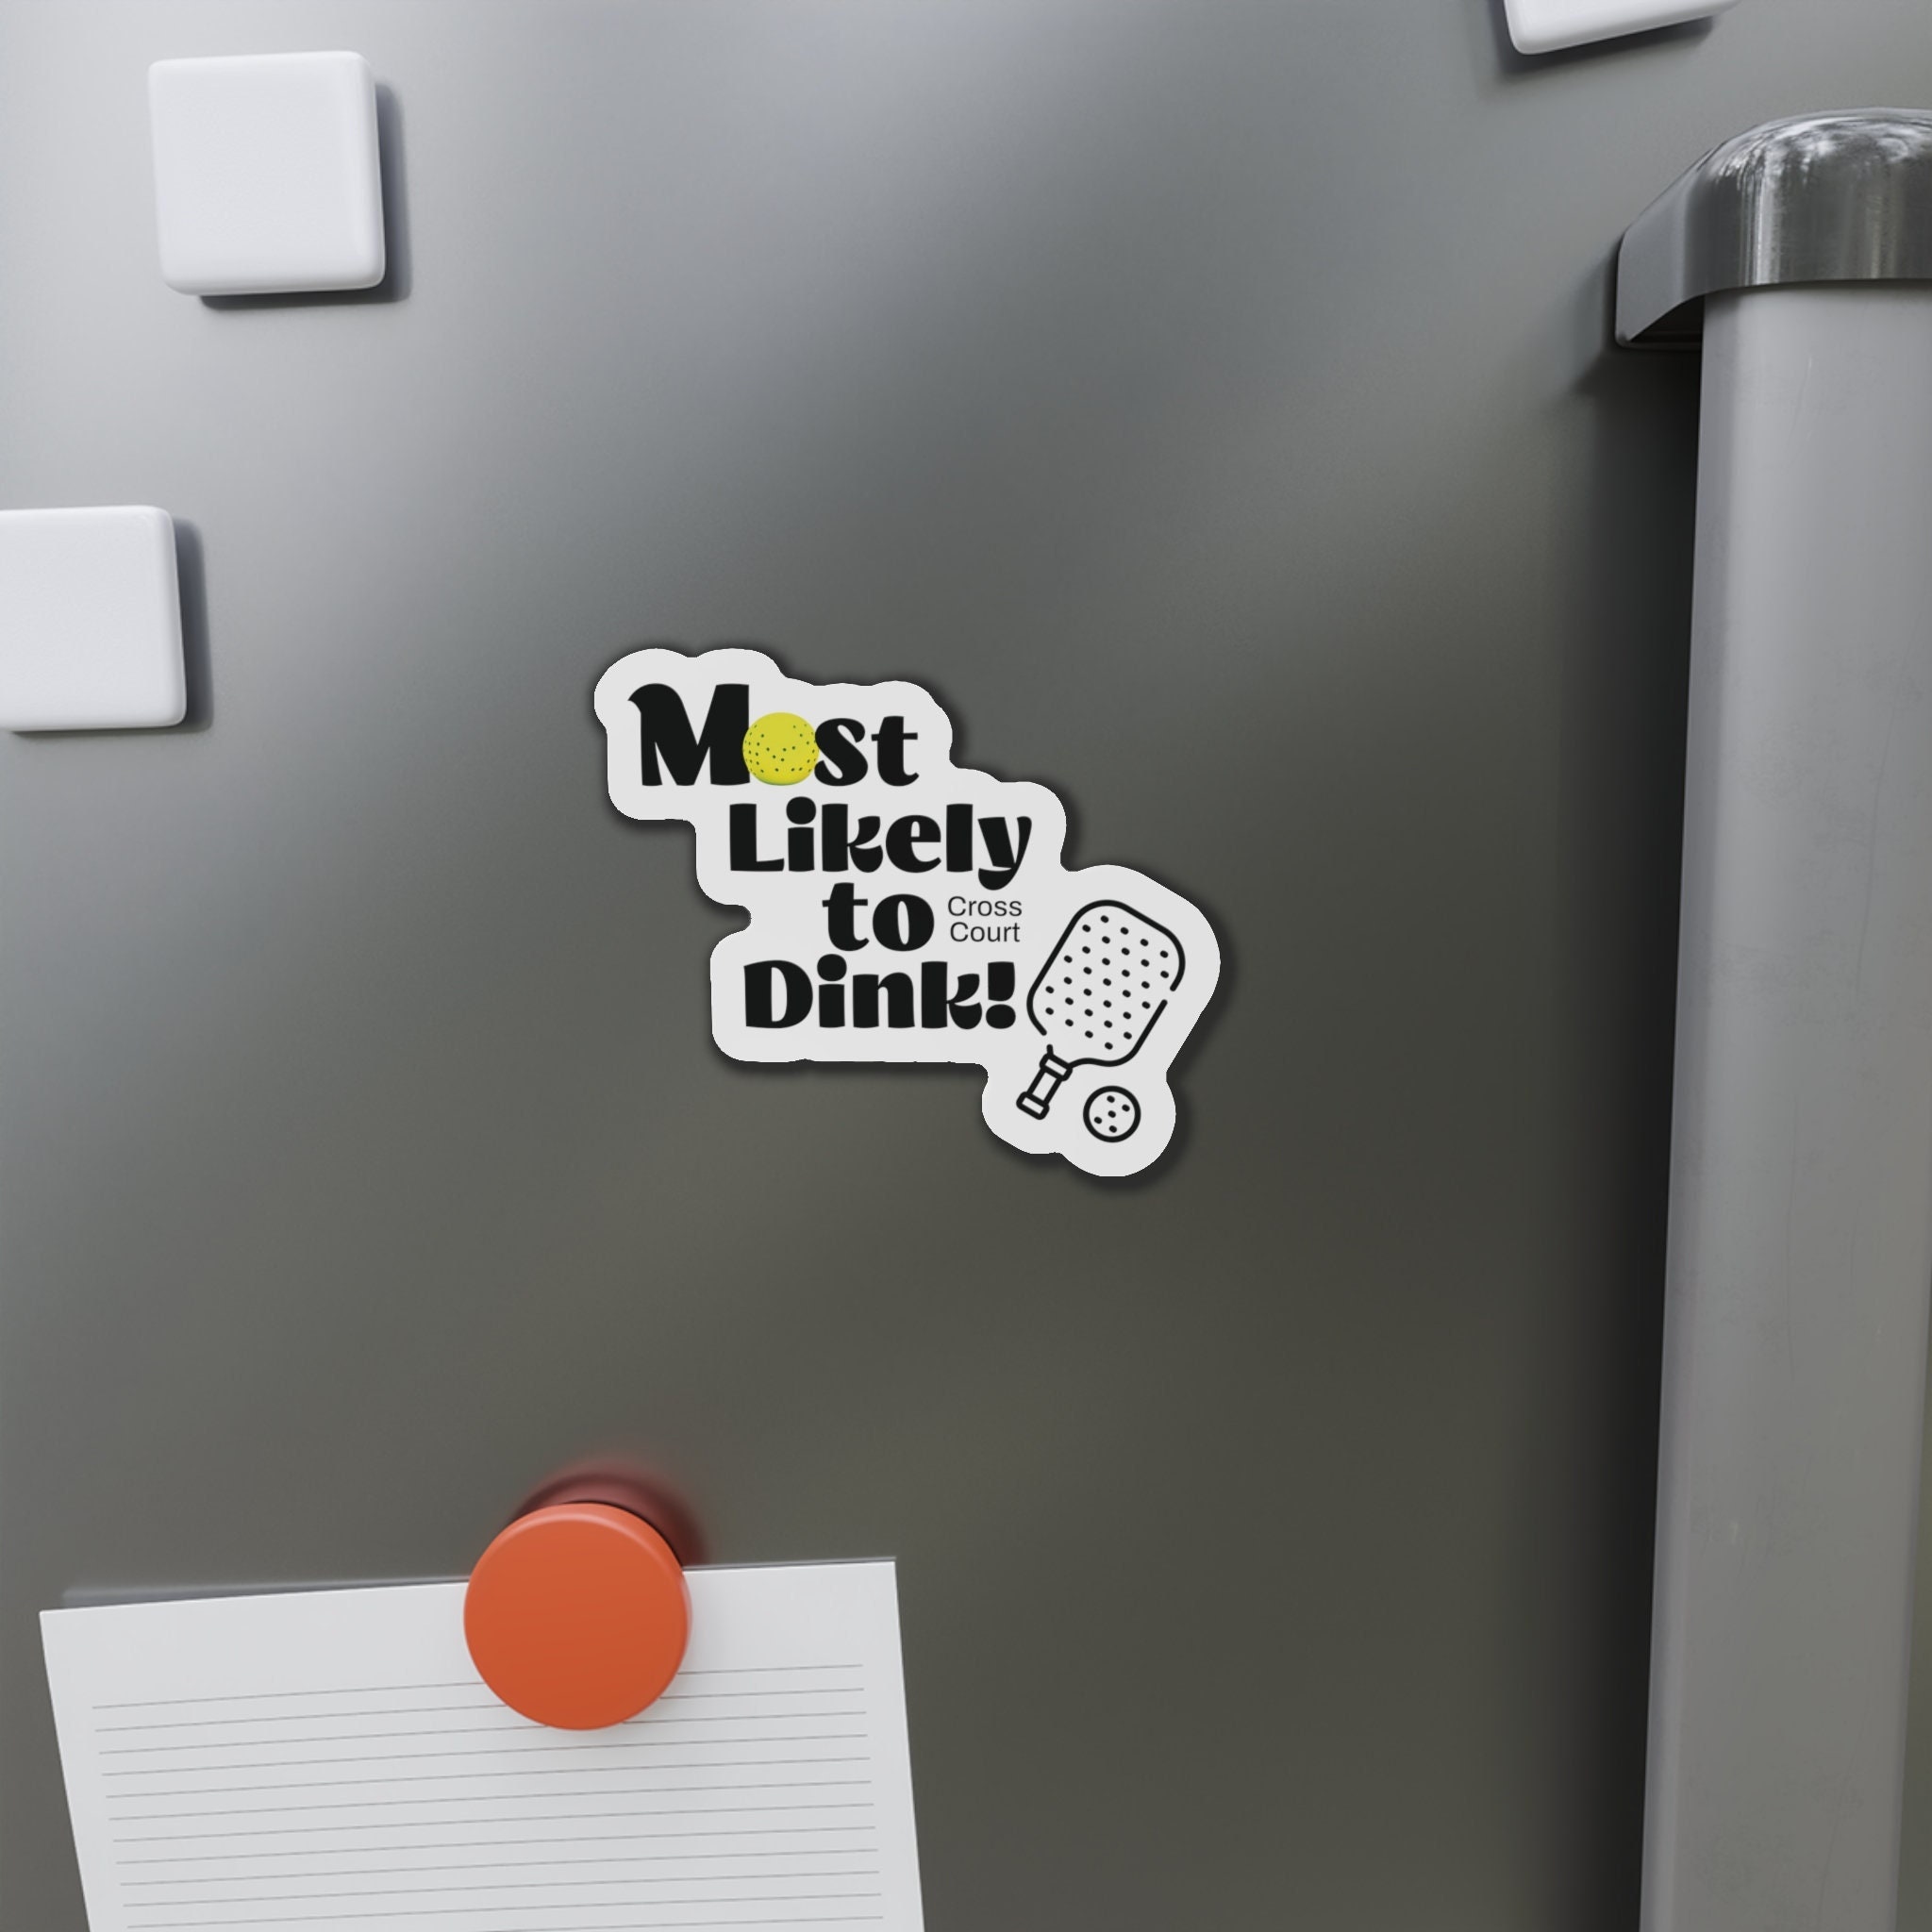 brb. (Be Right Back) Magnet for Sale by CoralReefZA